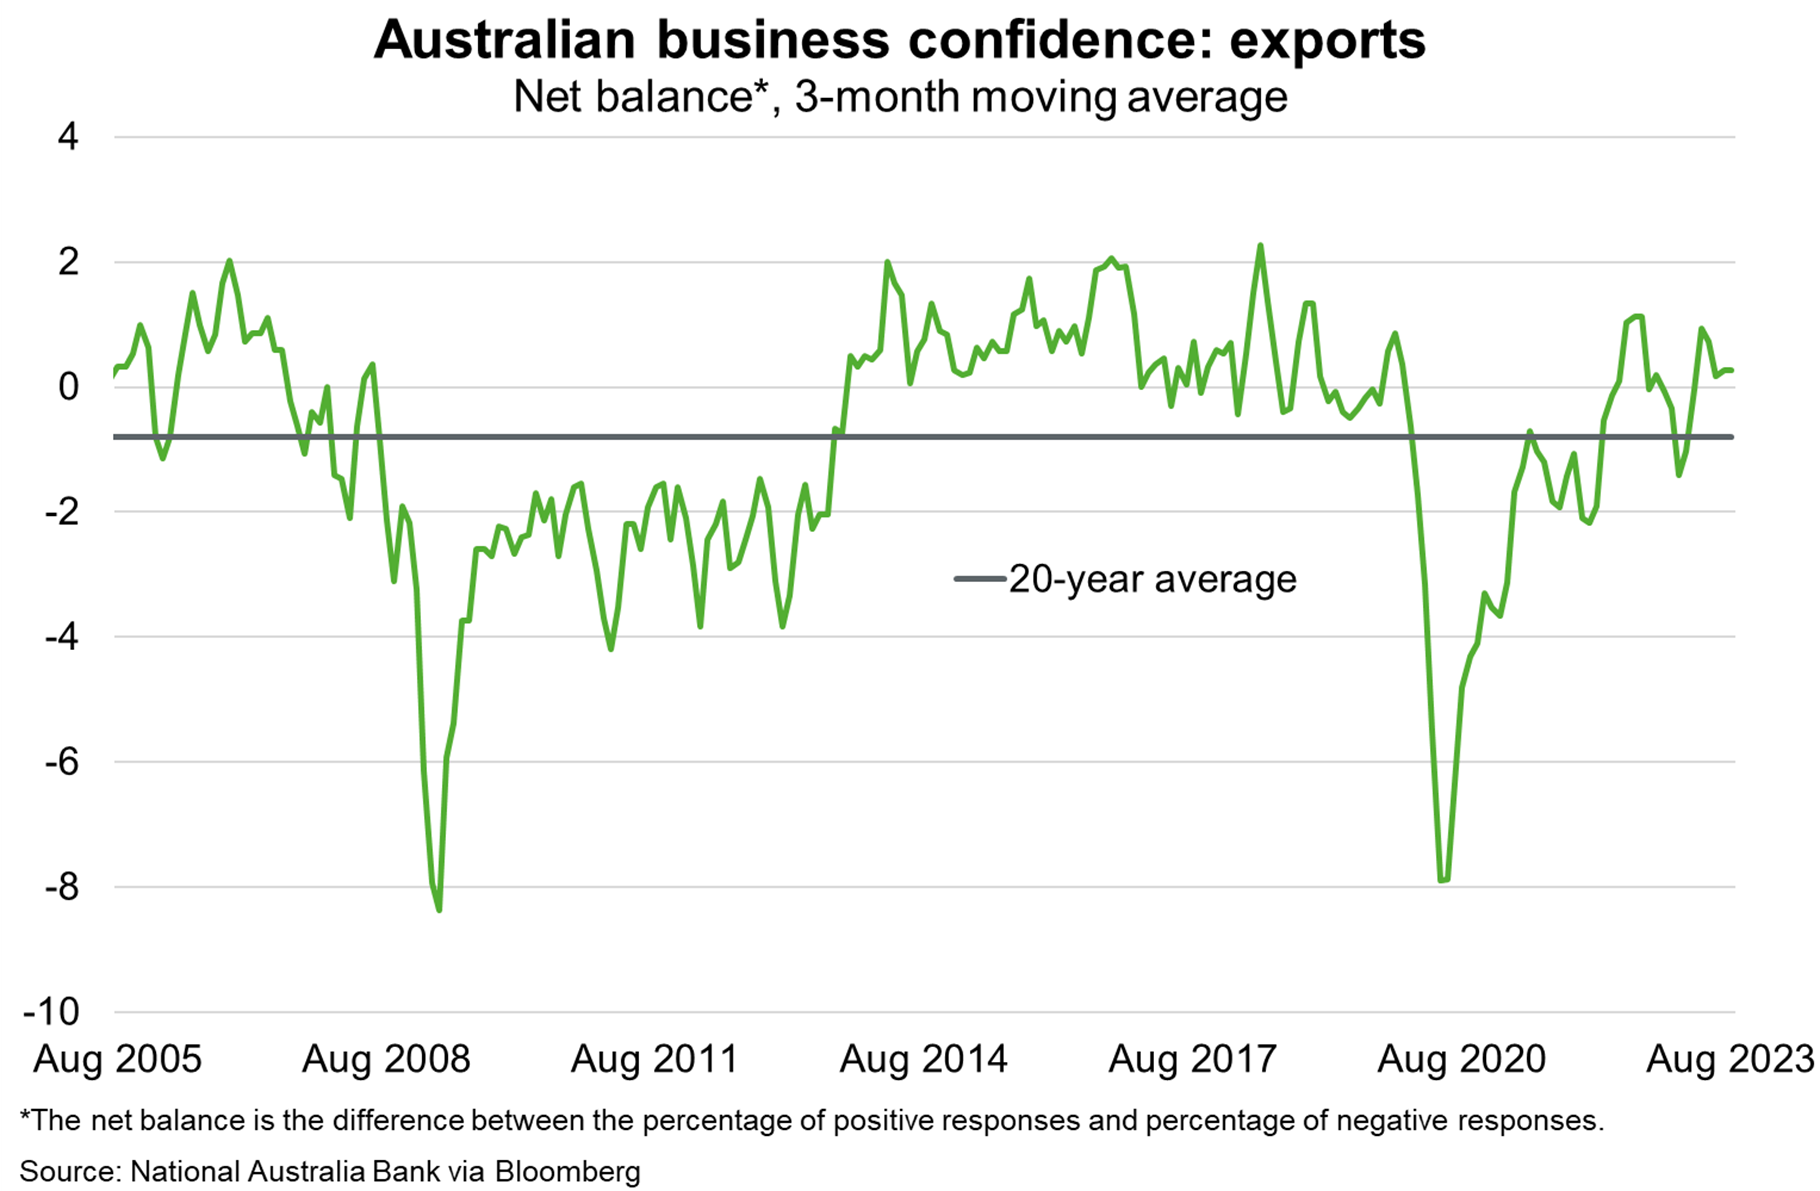 Fewer supply disruptions and lower freight costs (alongside the competitive AUD) are likely supporting the confidence of exporters.